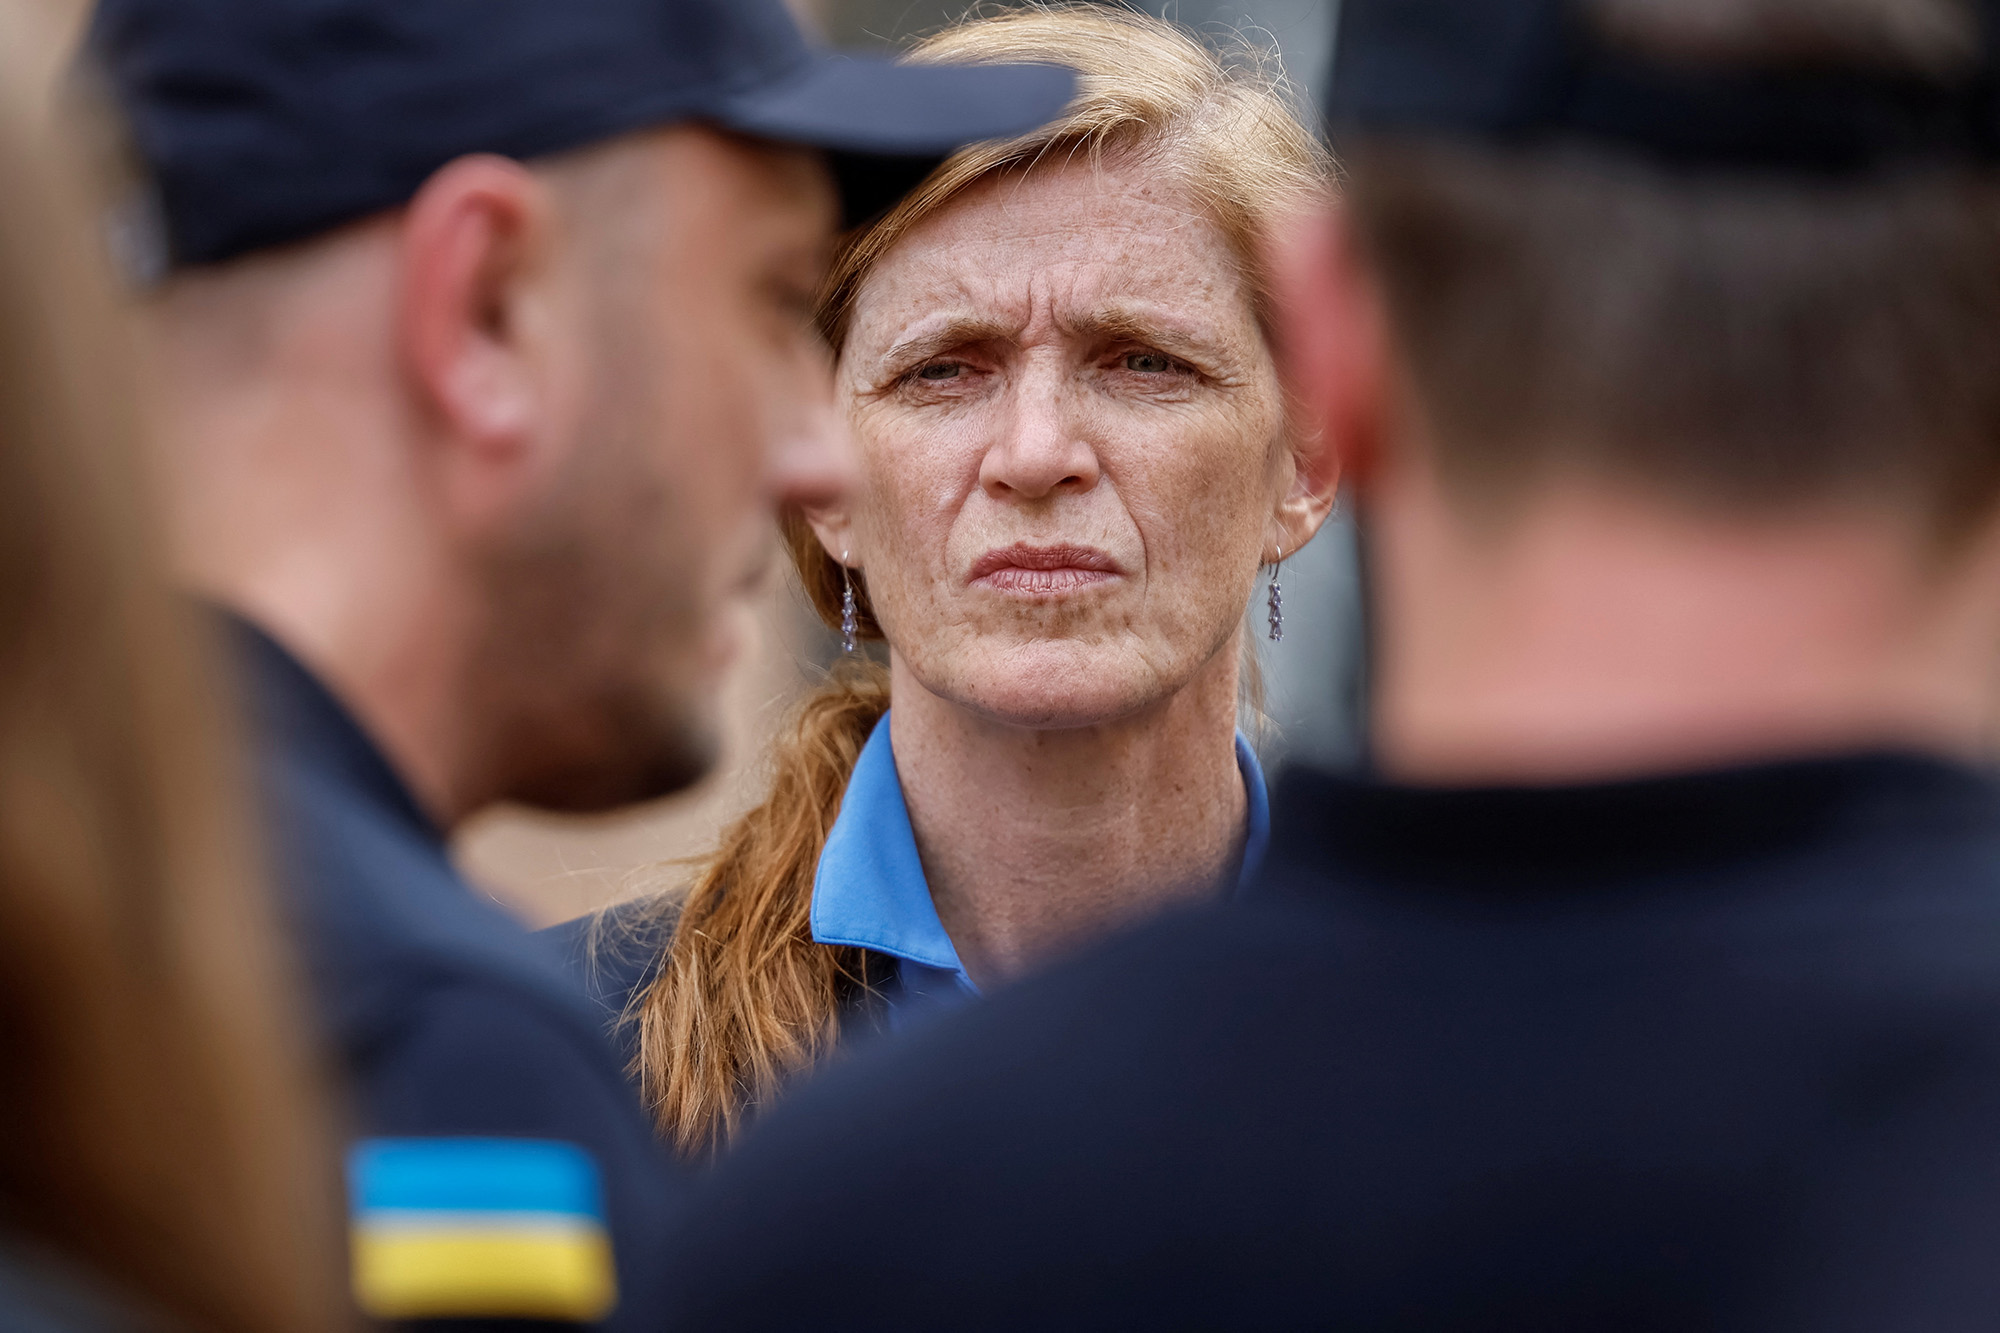 United States Agency for International Development Administrator Samantha Power looks on while talking with Ukrainian rescuers during a visit to Kyiv, Ukraine, on July 17.